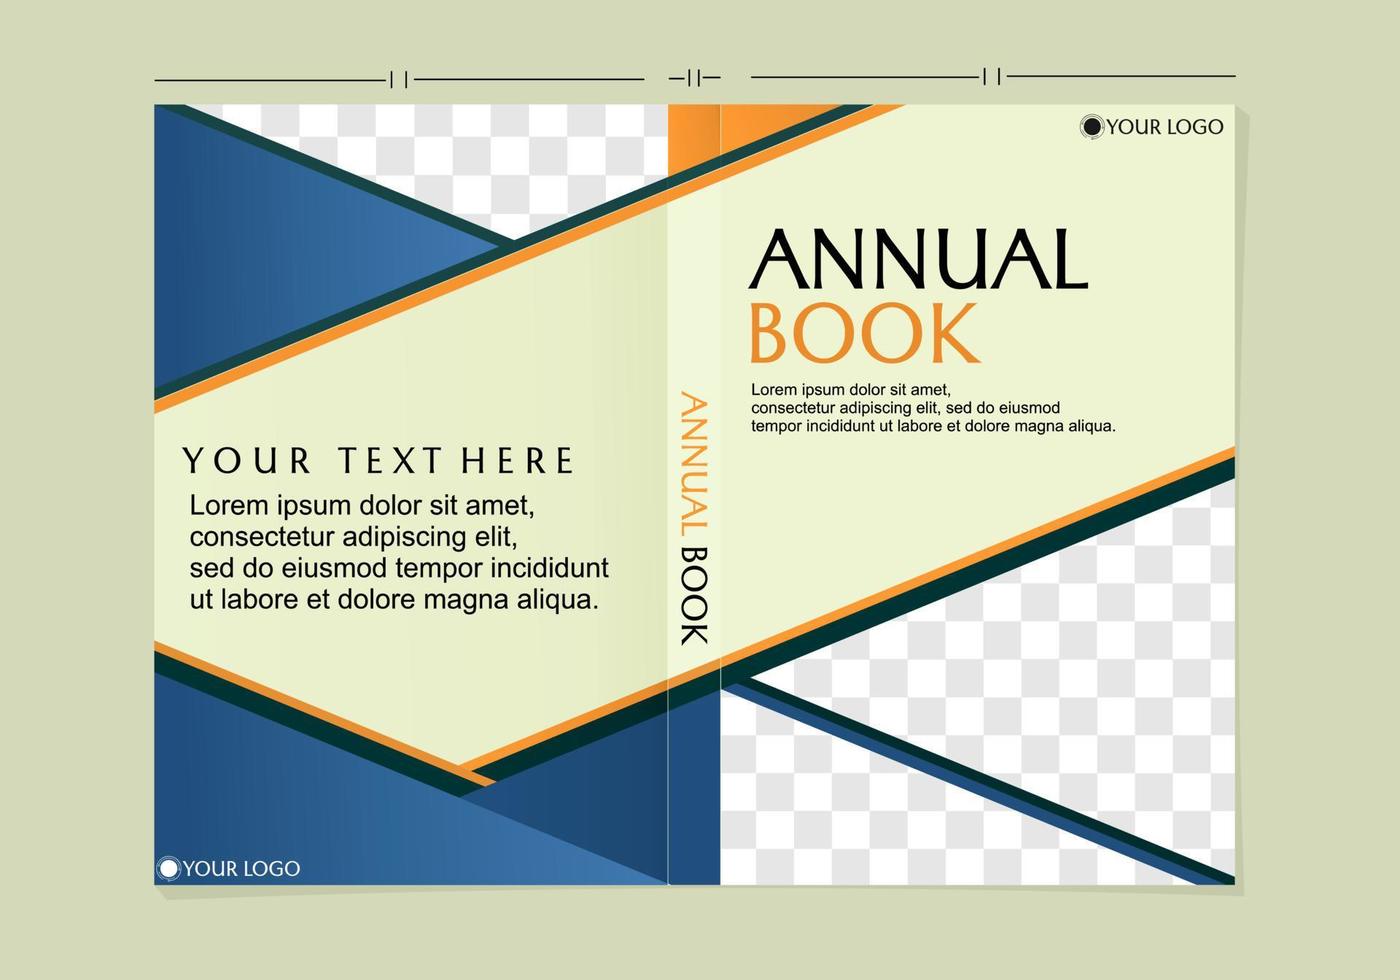 geometric style annual book cover design. modern and trendy background vector